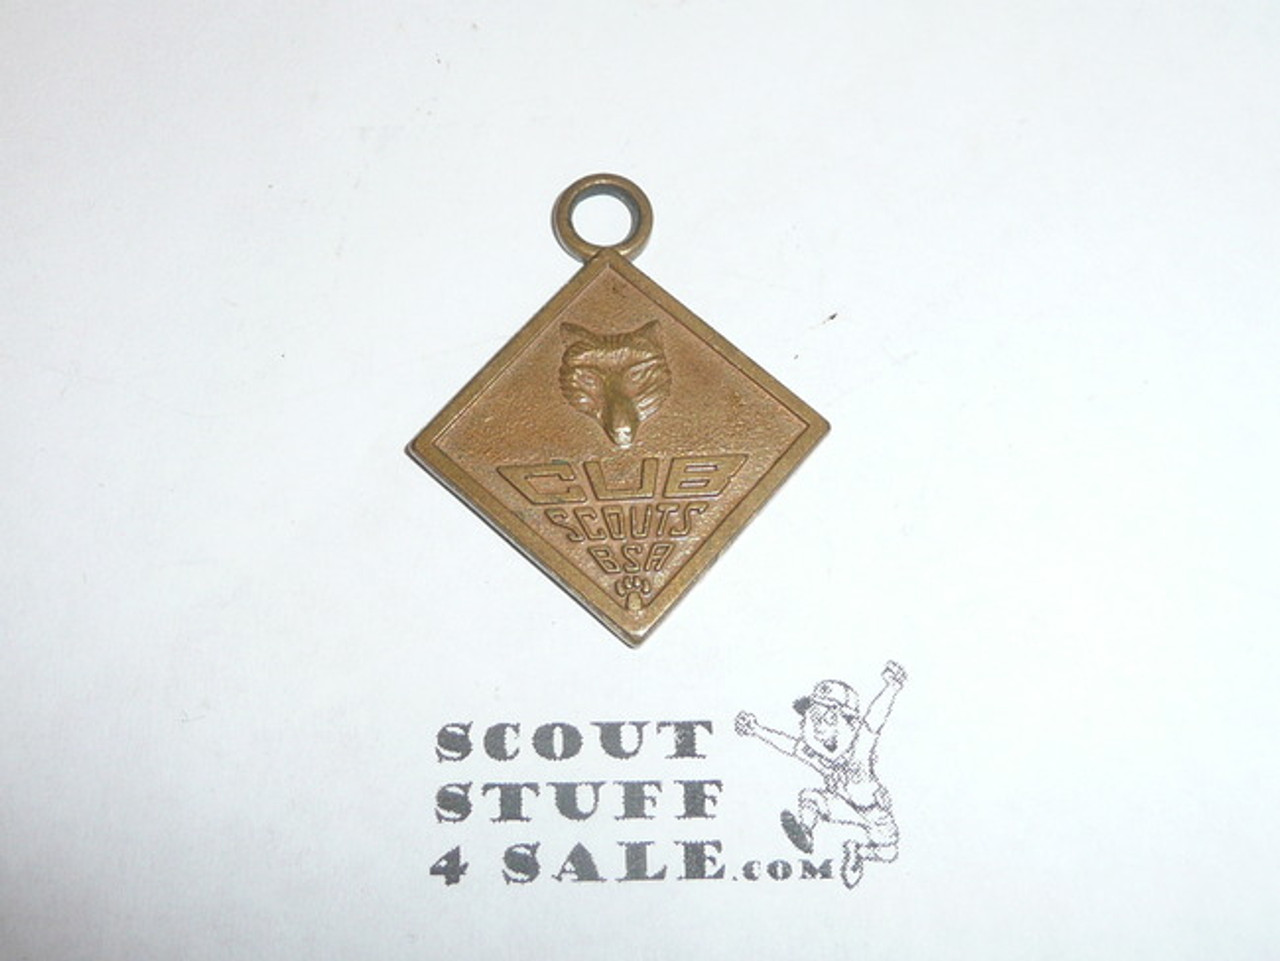 Cub Scout Key Chain fob, Promise on the back